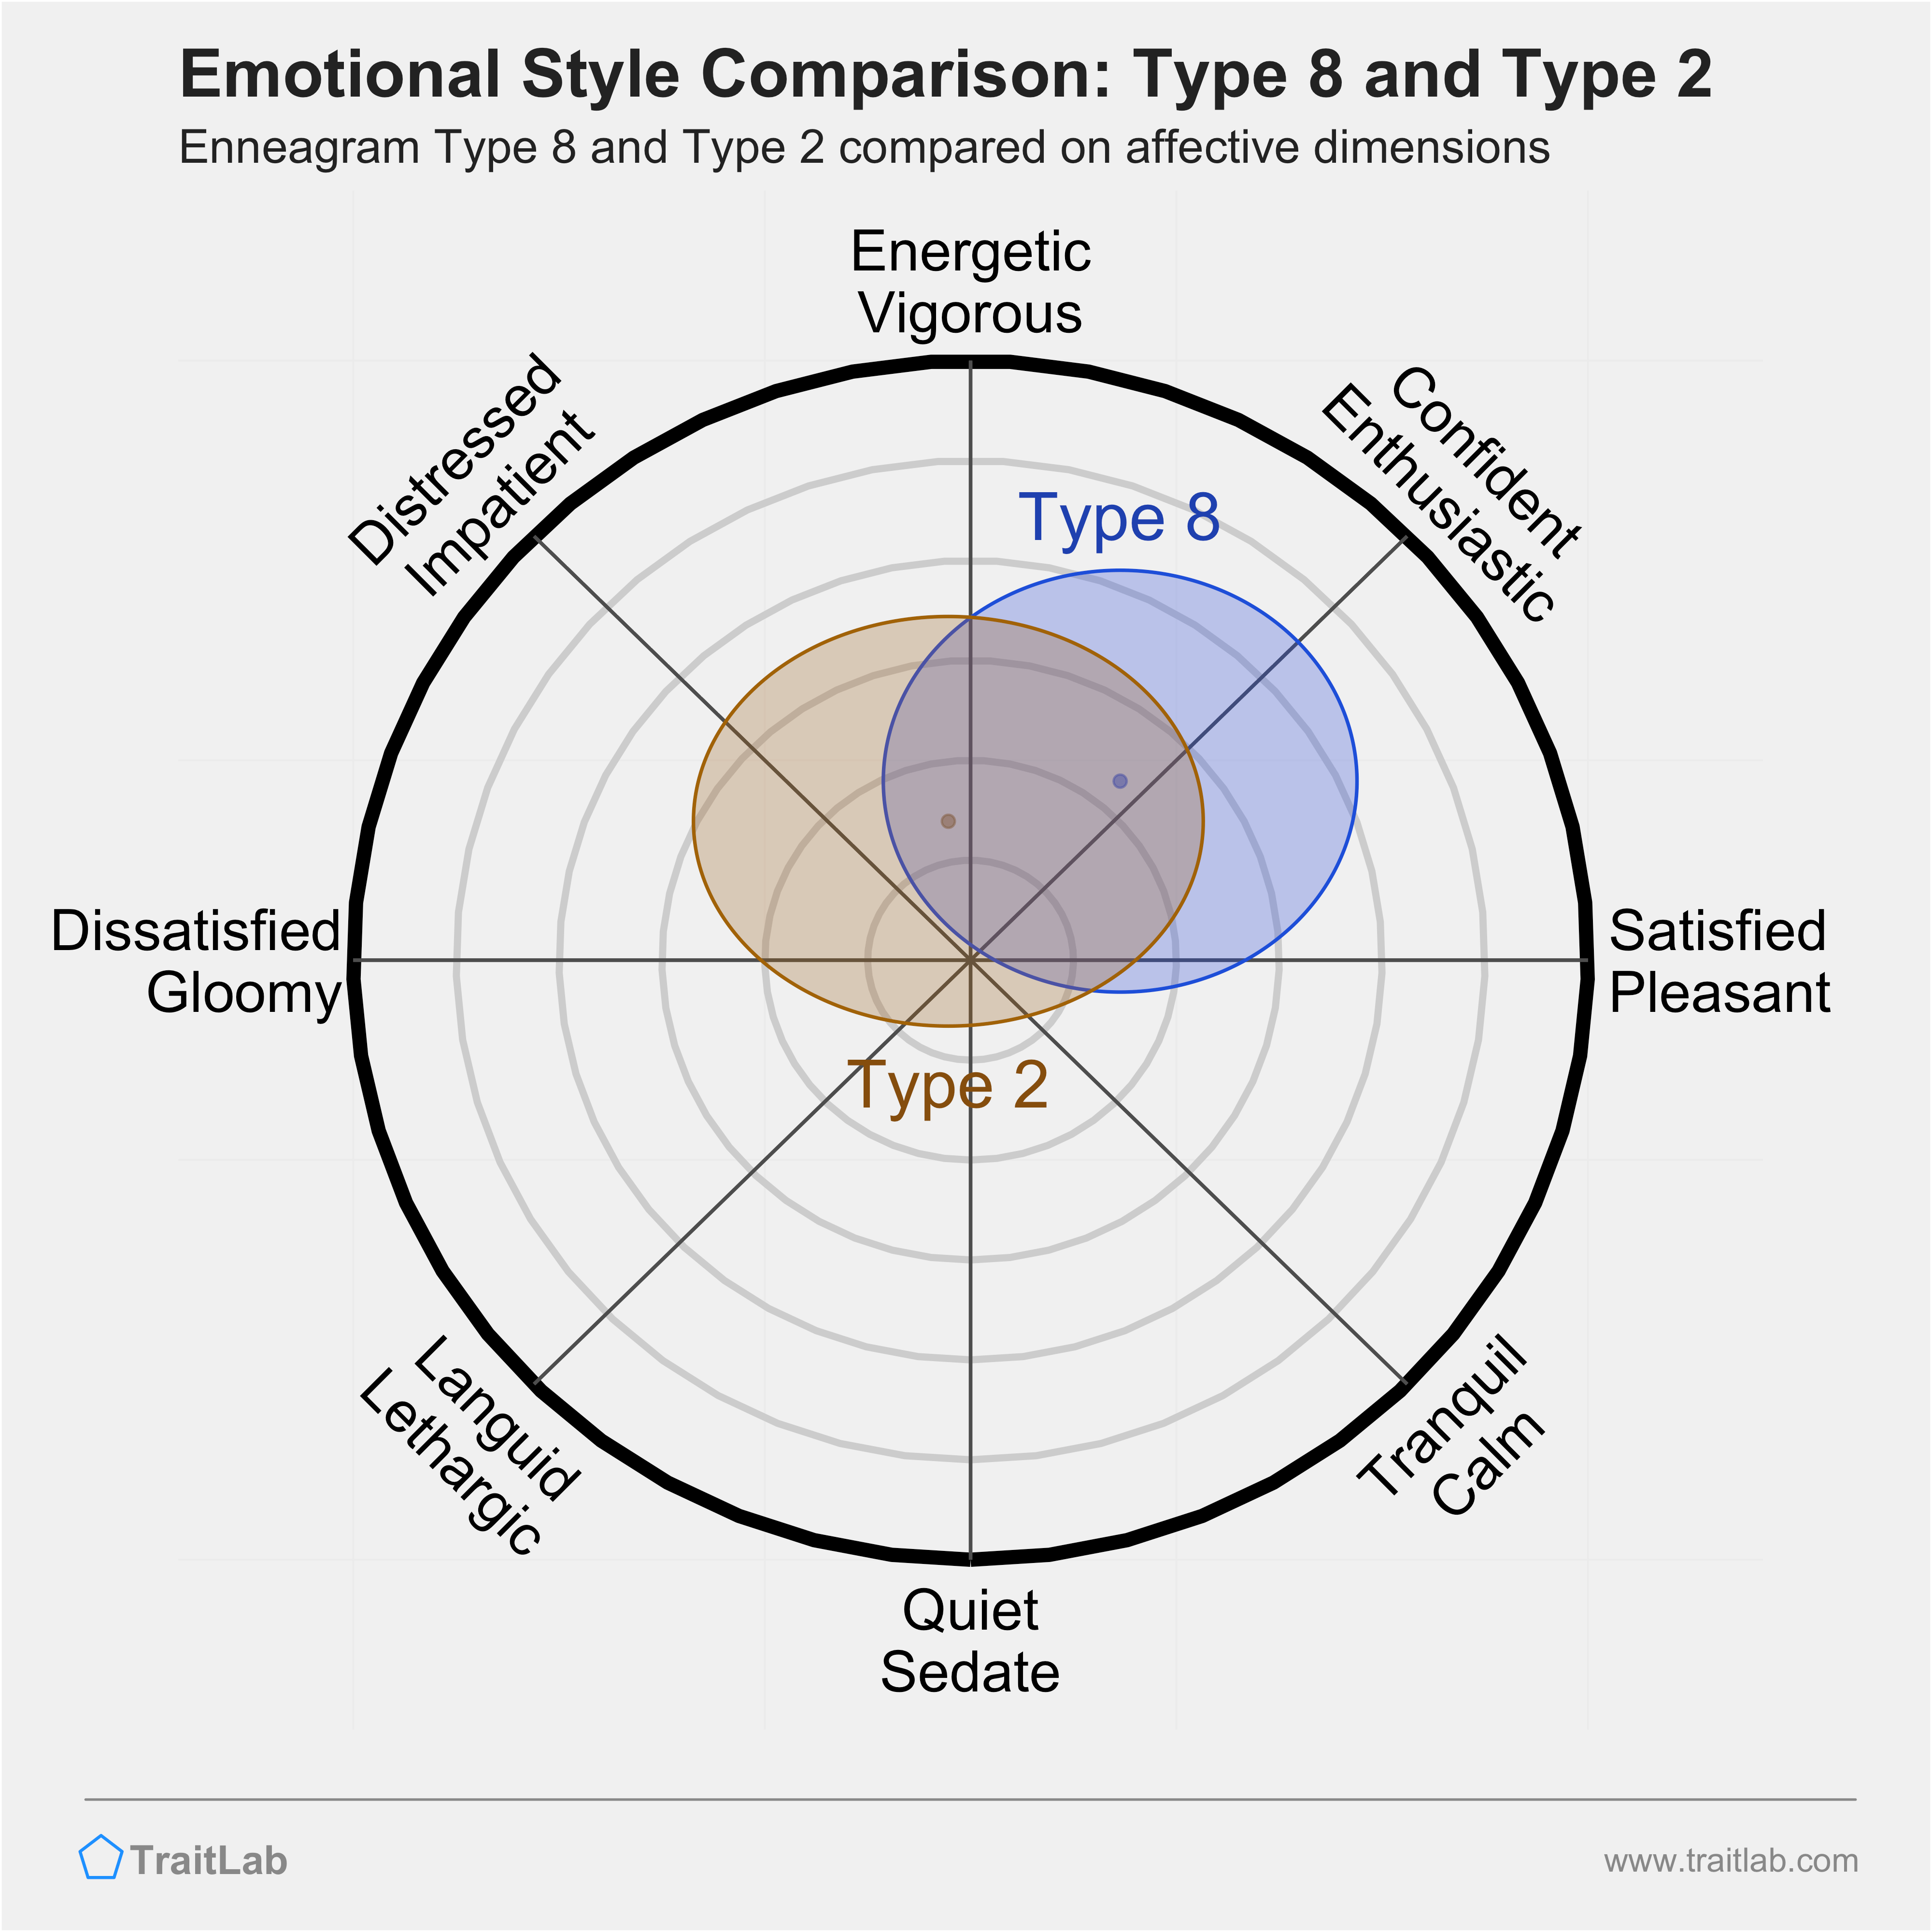 Type 8 and Type 2 comparison across emotional (affective) dimensions